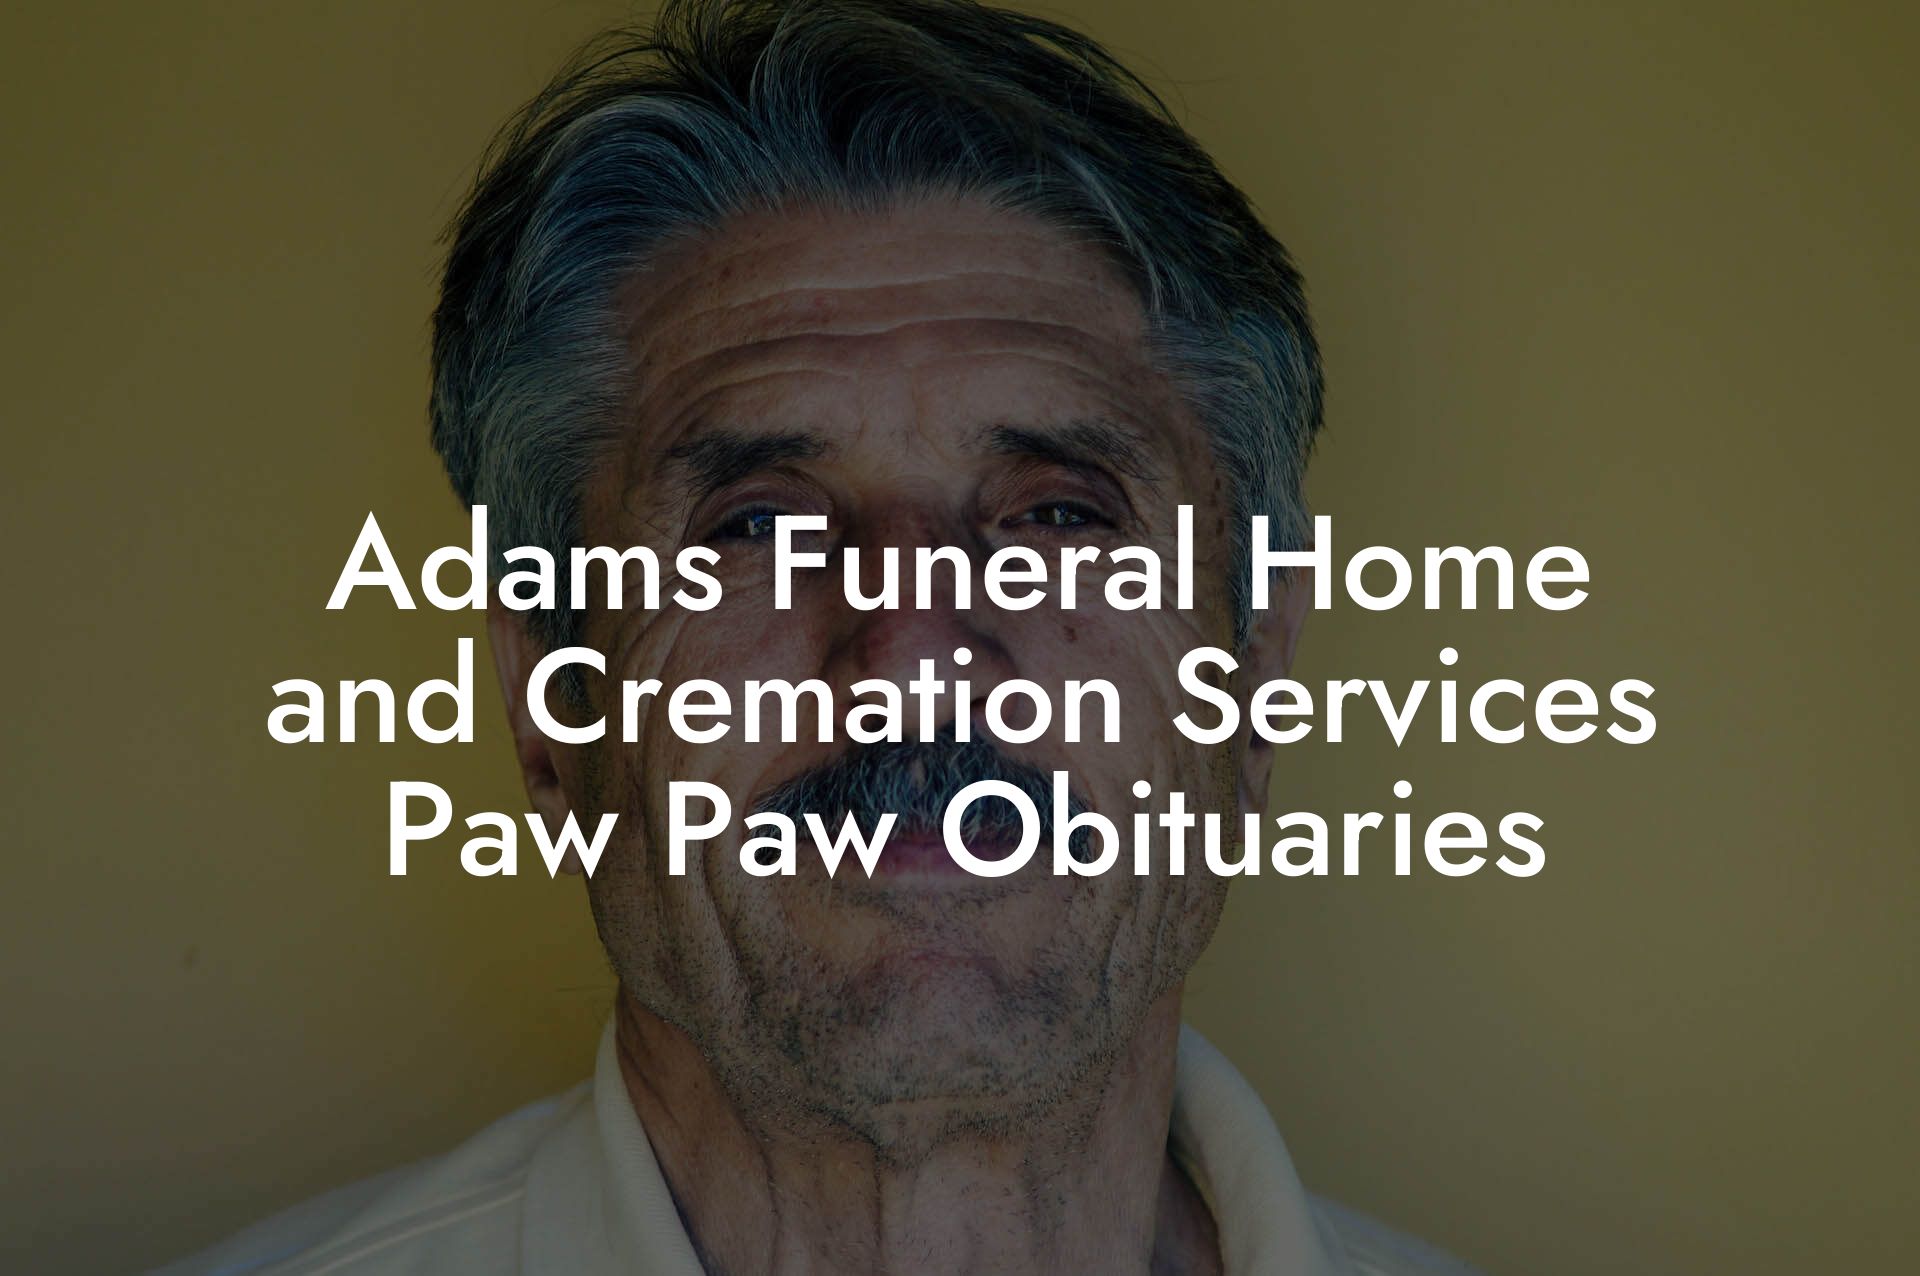 Adams Funeral Home and Cremation Services Paw Paw Obituaries Eulogy